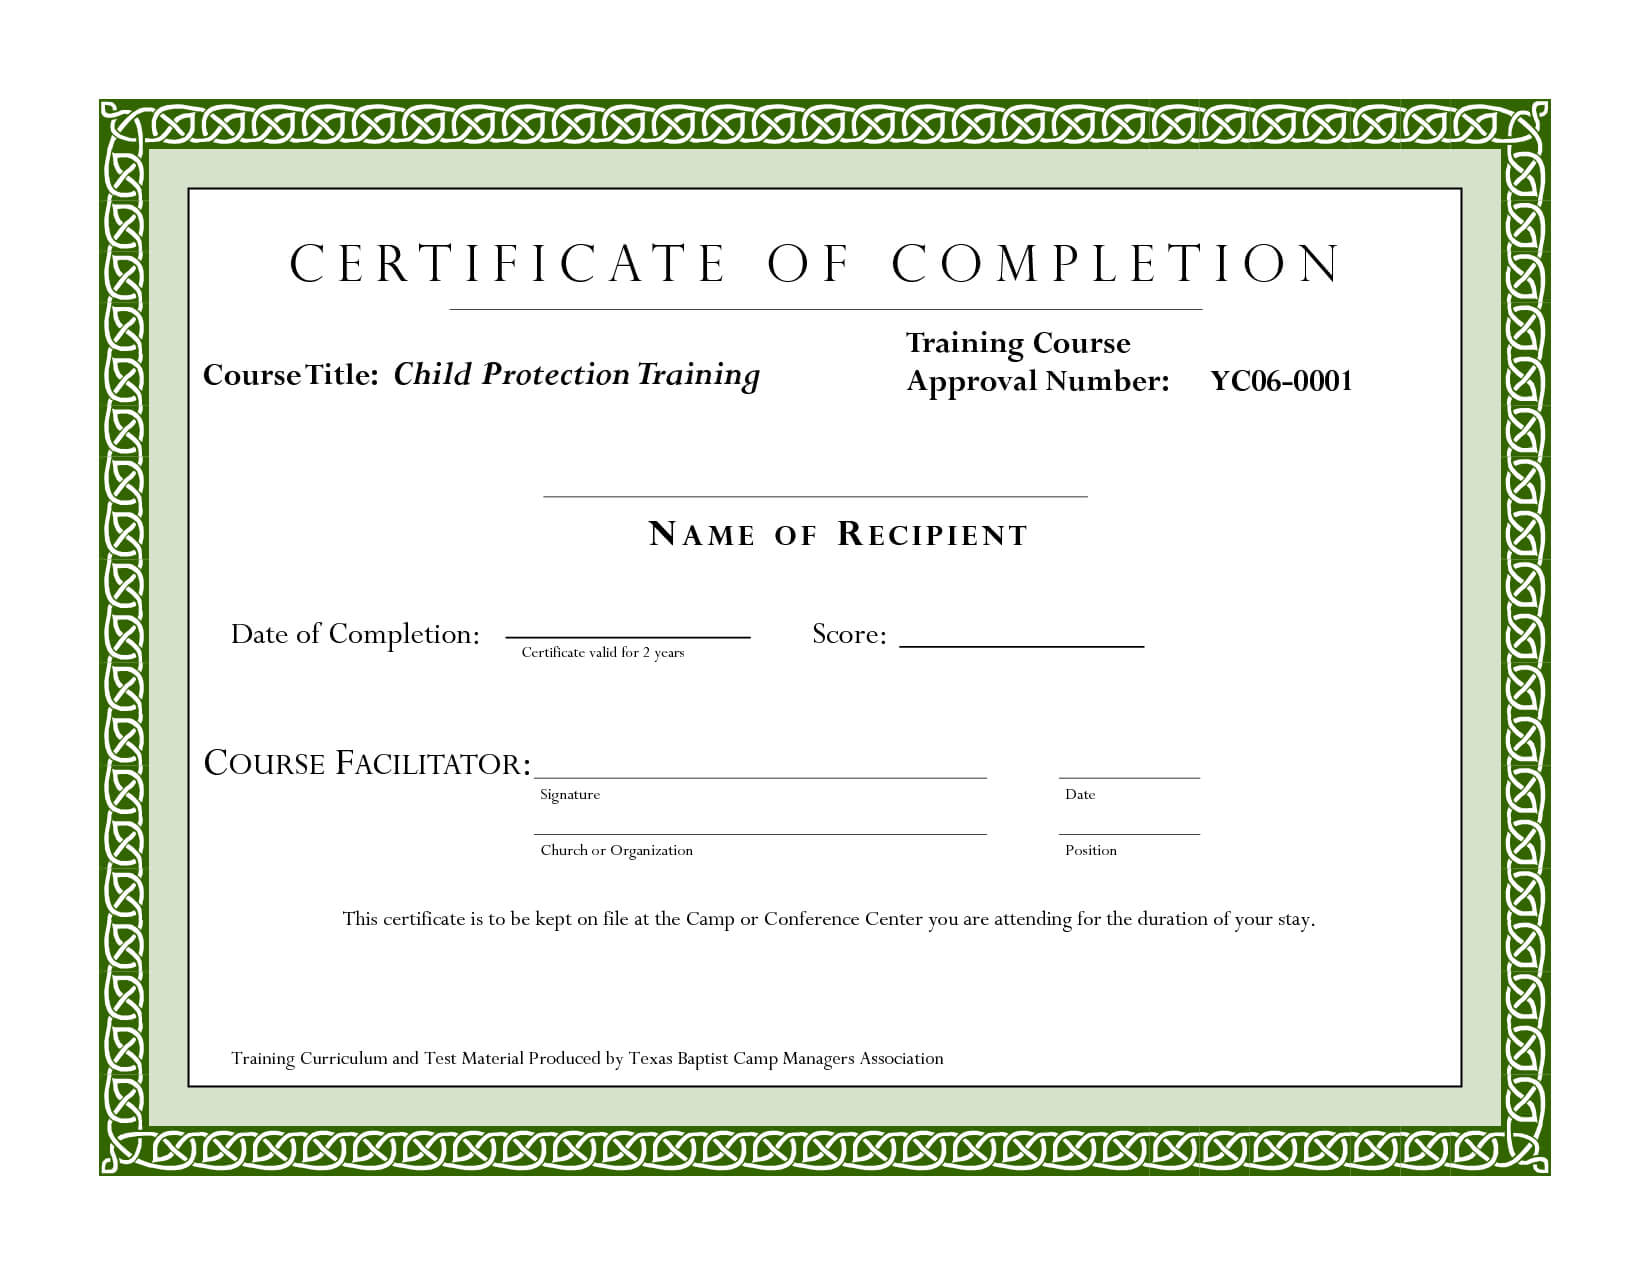 Course Completion Certificate Template | Certificate Of Throughout Certification Of Completion Template